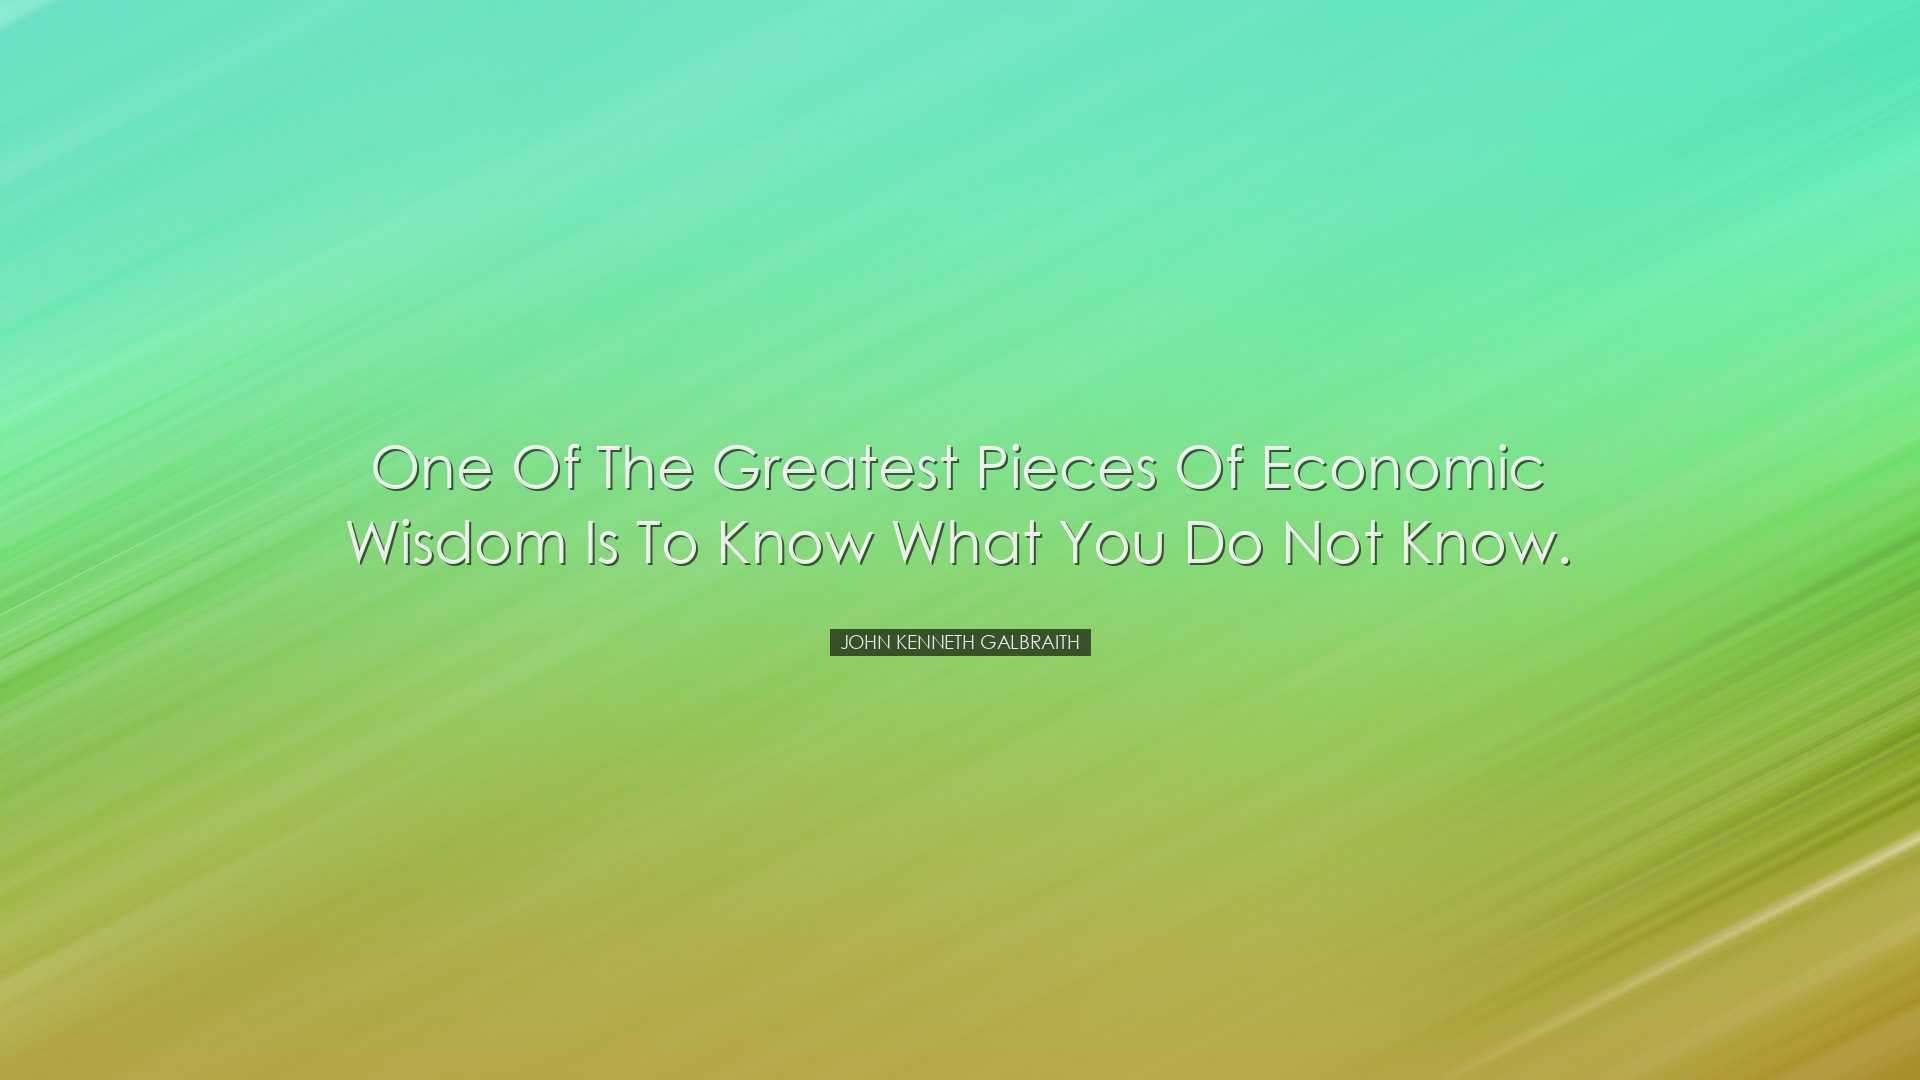 One of the greatest pieces of economic wisdom is to know what you